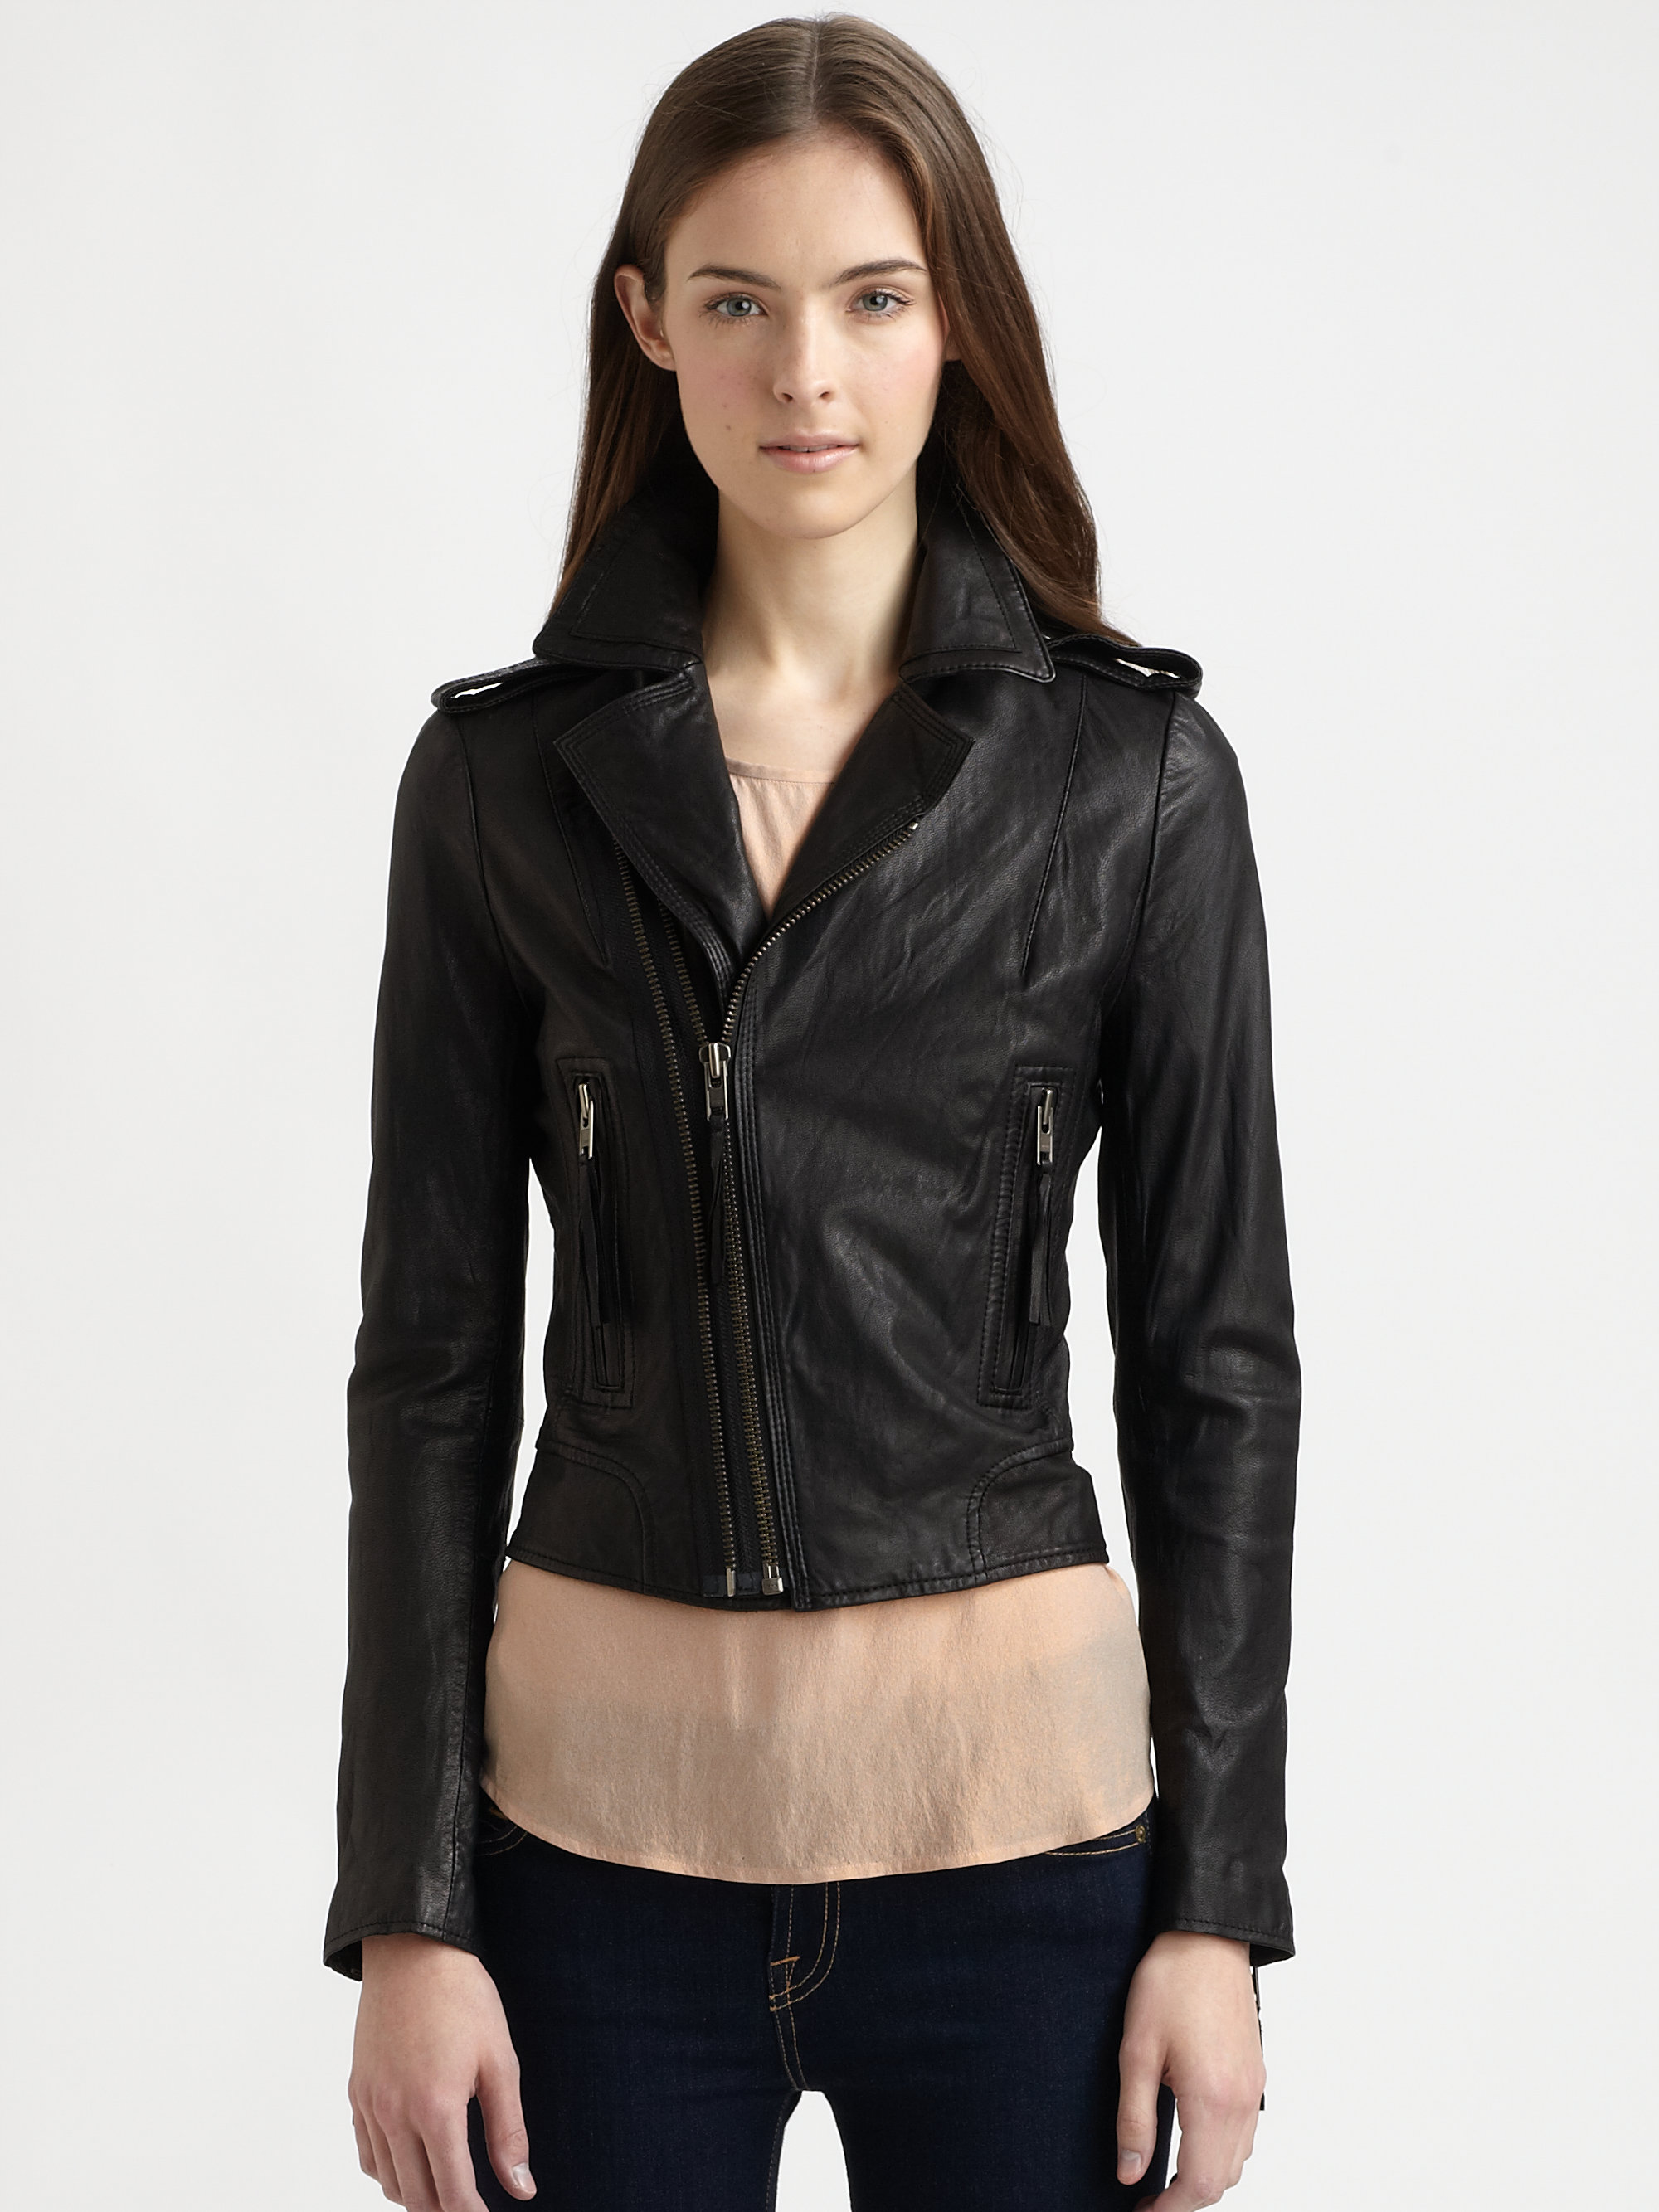 Lyst - Joie Ailey Leather Jacket in Black